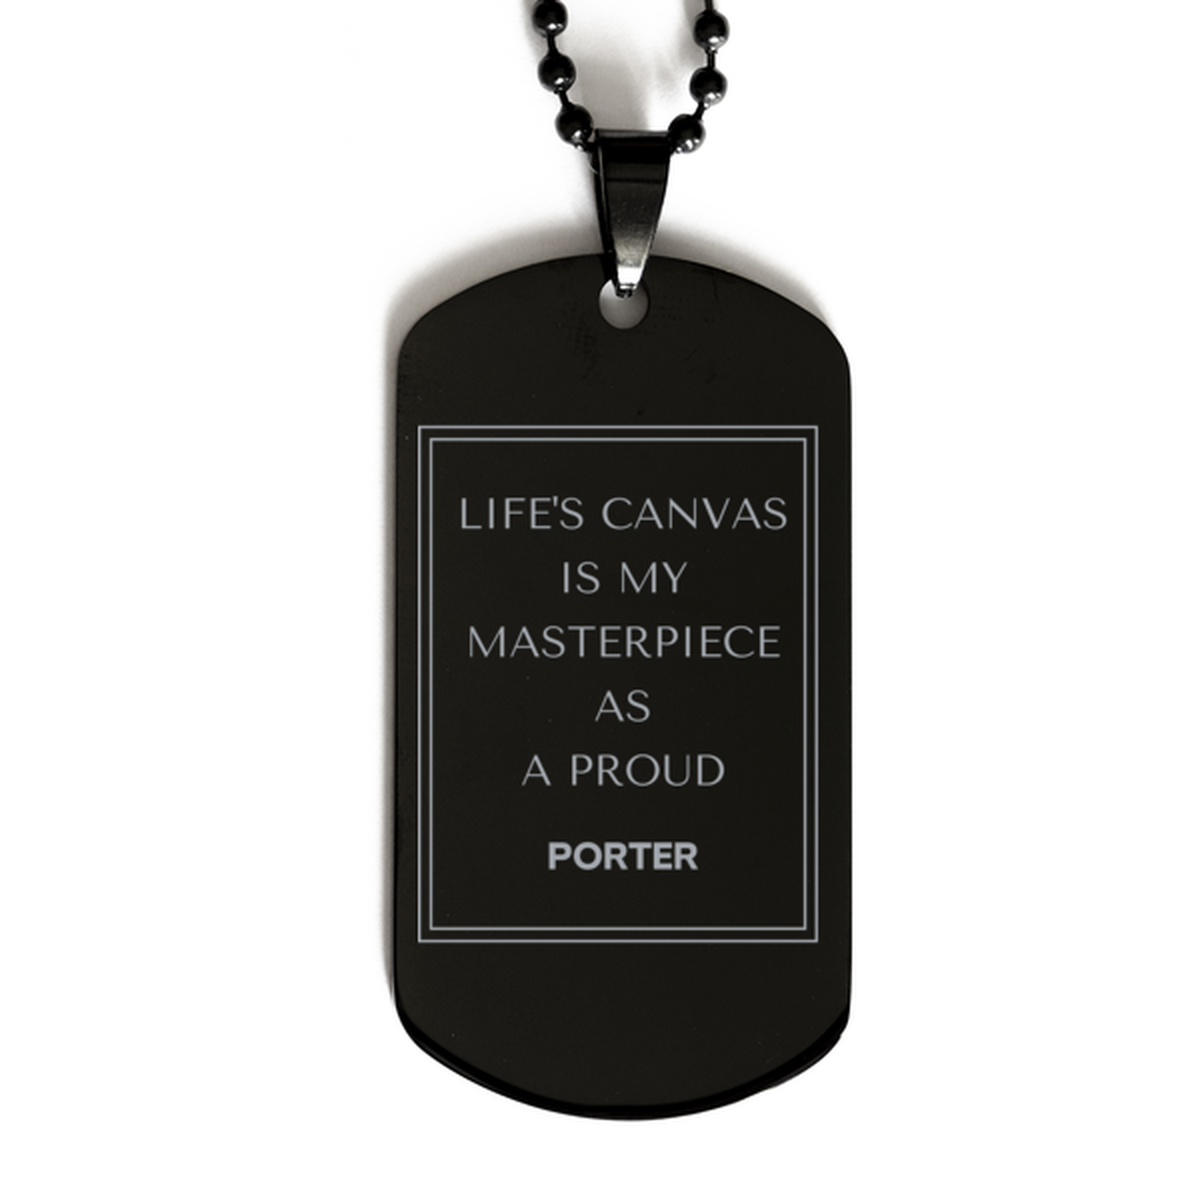 Proud Porter Gifts, Life's canvas is my masterpiece, Epic Birthday Christmas Unique Black Dog Tag For Porter, Coworkers, Men, Women, Friends